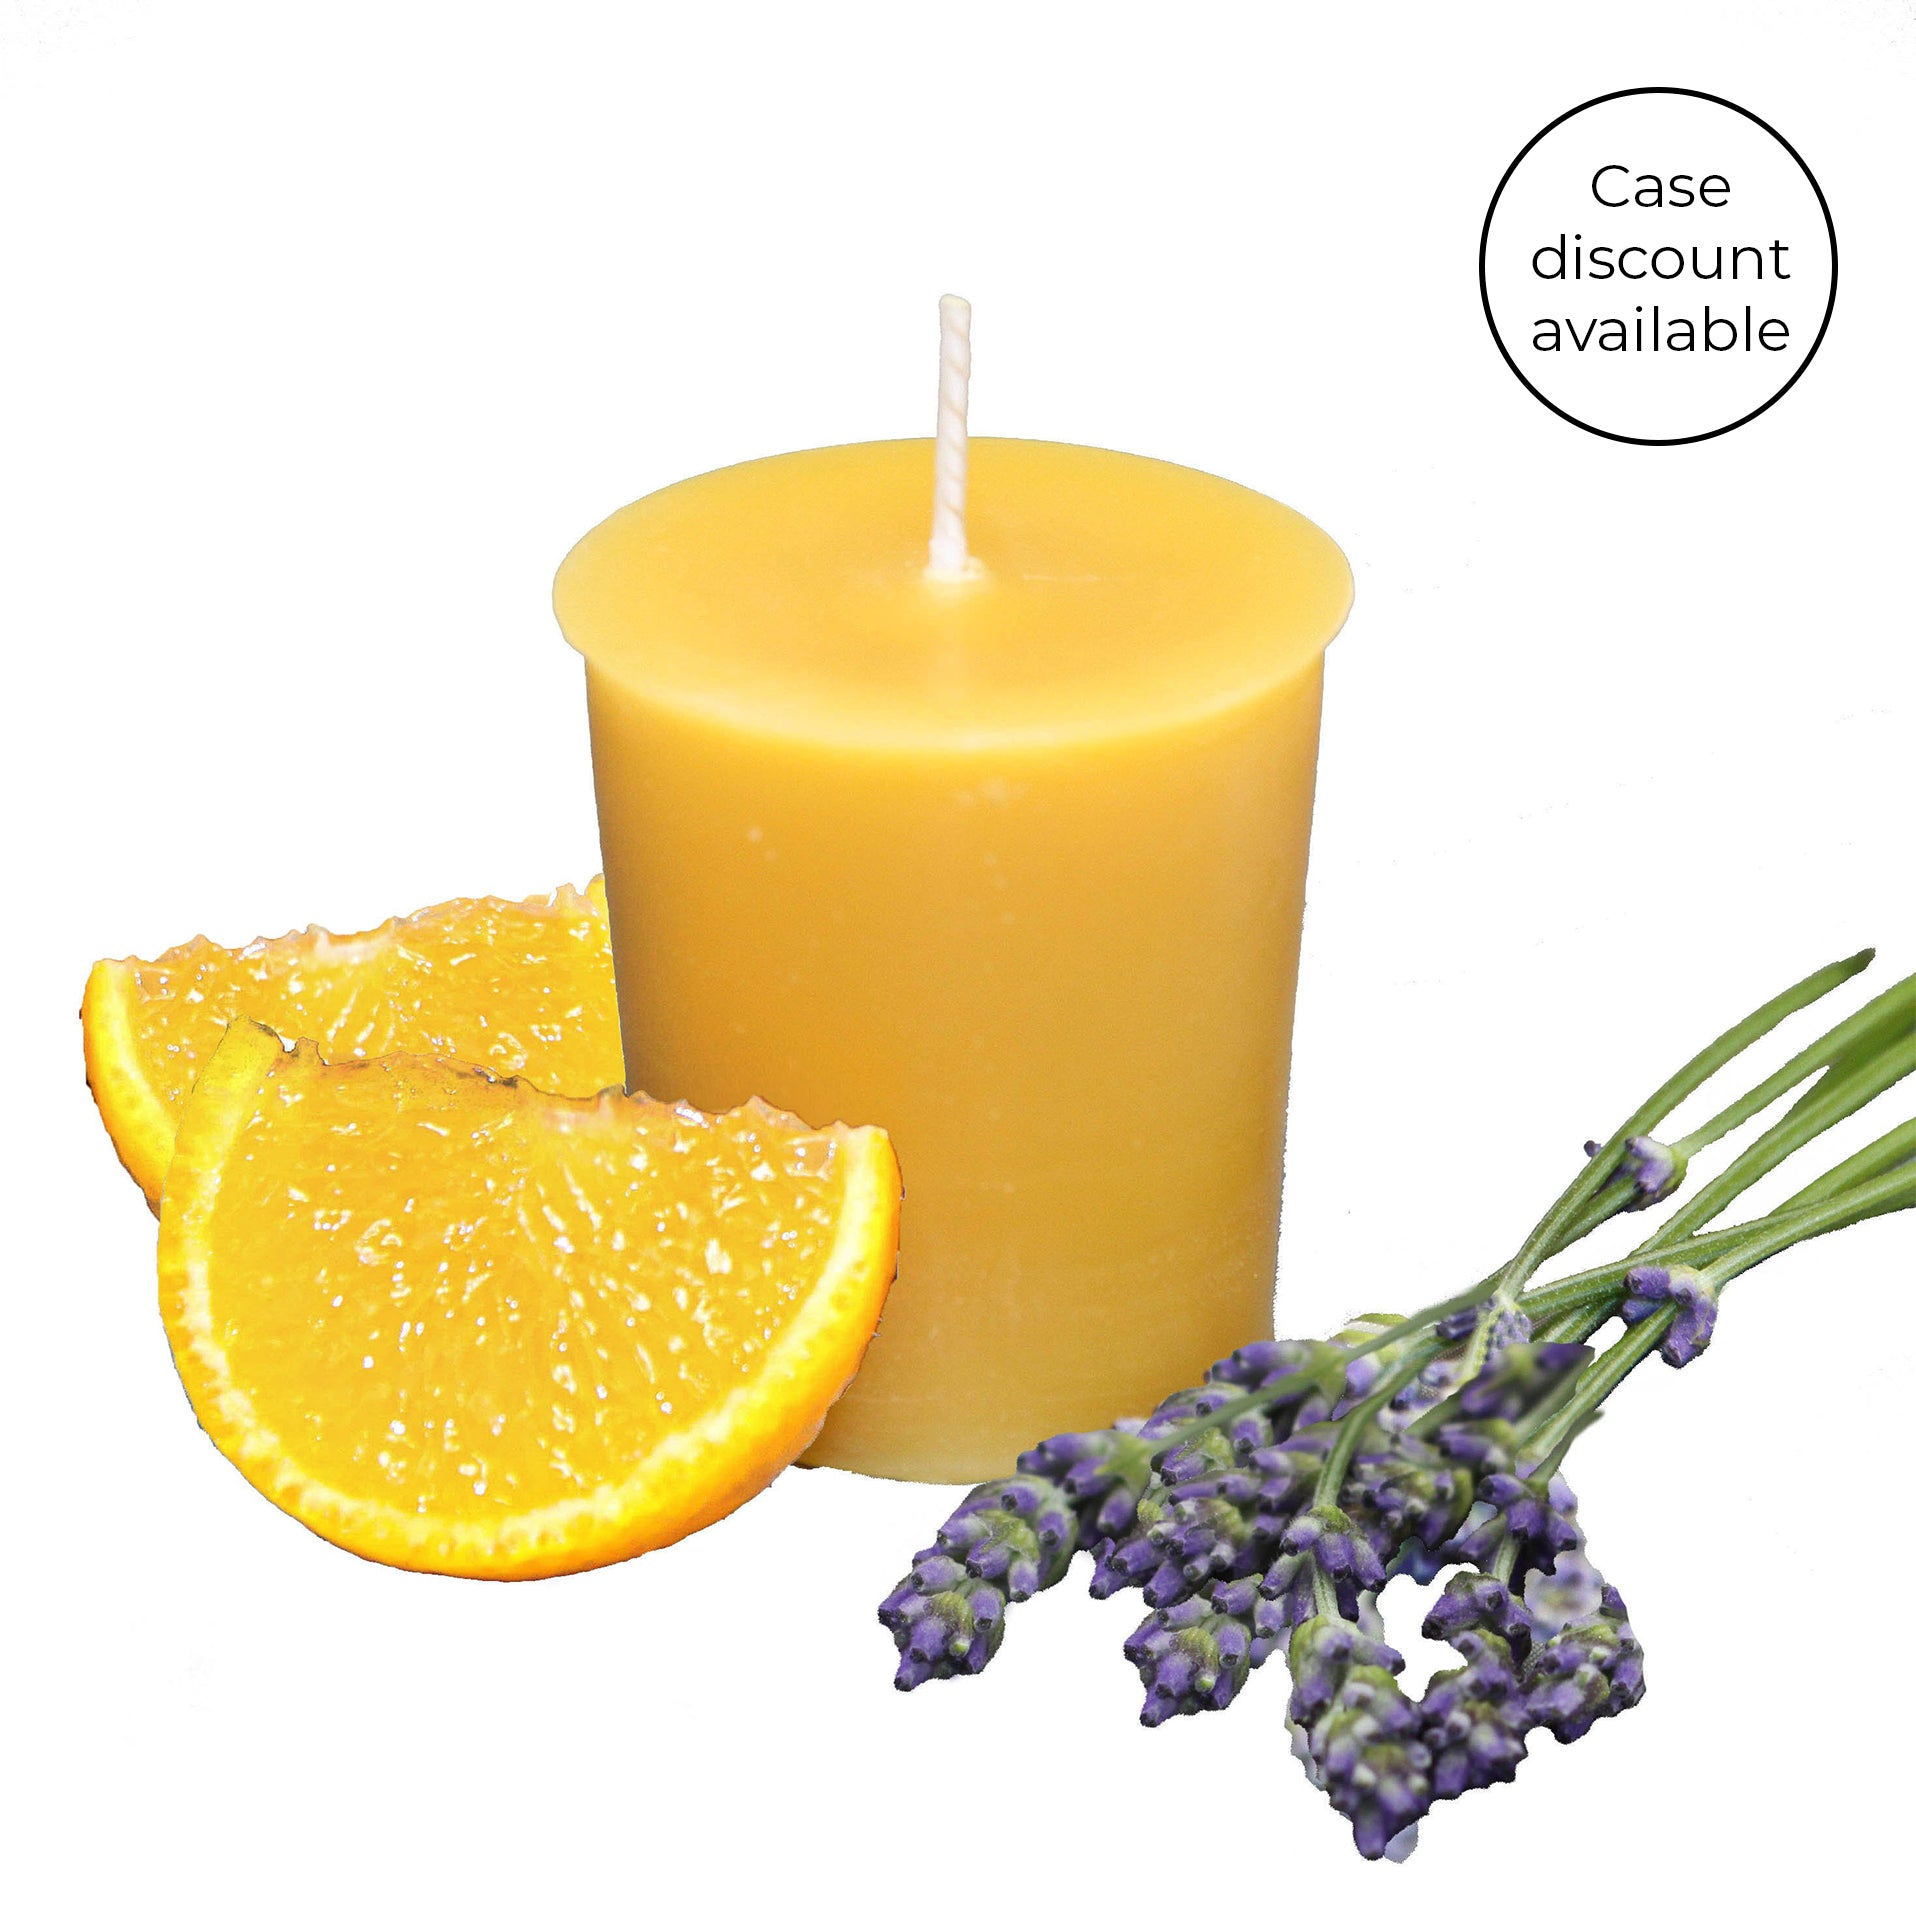 Wholesale candle vegetables wax For Subtle Scents And Fragrances